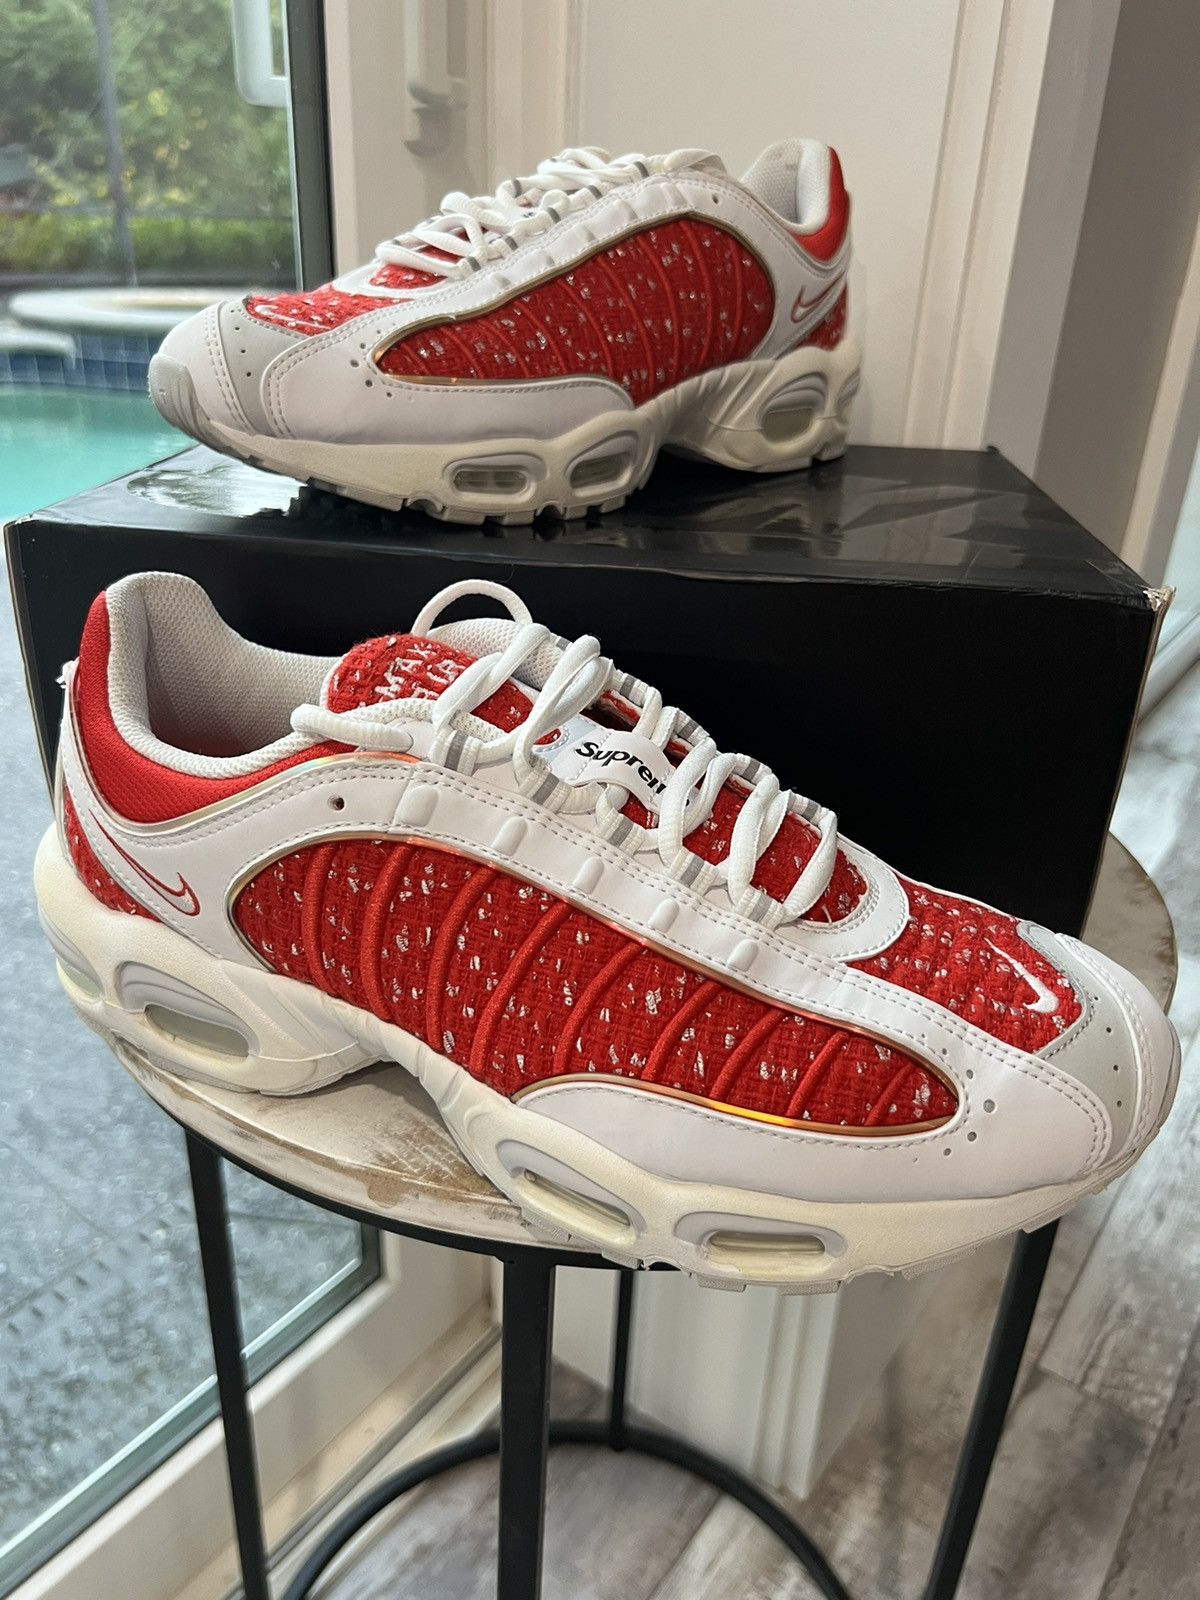 Nike Nike Air Max 4 Tailwind Supreme University Red size 11 | Grailed